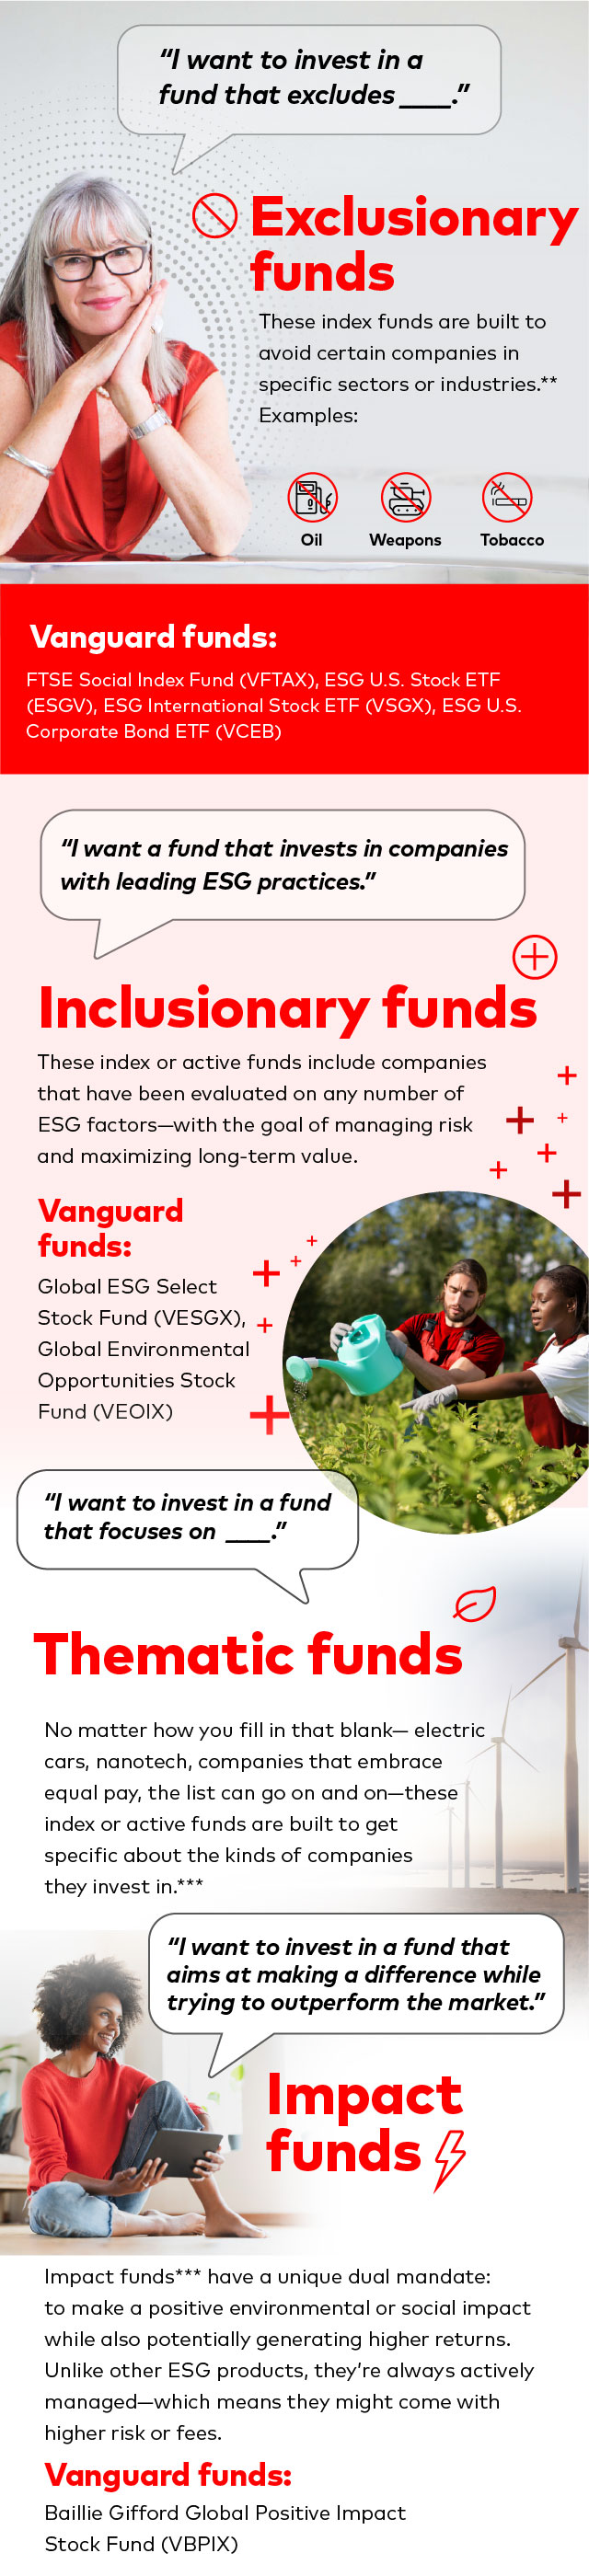 4 kinds of ESG funds: What you need to know  A smiling woman rests her face against her folded hands against a background of gray radial dots. Text reads: Exclusionary funds “I want to invest in a fund that excludes blank.” These index funds are built to filter out certain companies in specific sectors or industries. Examples: oil, weapons, tobacco. Vanguard funds: FTSE Social Index Fund (VFTAX), ESG U.S. Stock ETF (ESGV), ESG International Stock ETF (VSGX), ESG U.S. Corporate Bond ETF (VCEB)  In a circular cutaway surrounded by plus sign icons, a man and a woman work together to water some tall plants. Text reads: Inclusionary funds “I want a fund that invests in companies with leading ESG practices.” These index or active funds include companies that have been evaluated on any number of ESG factors—with the goal of managing risk and maximizing long-term value. Vanguard funds:  •	Active: Global ESG Select Stock Fund (VESGX) •	Index: Product research is underway.  Text appears in the foreground of an image of wind turbines on a beach: Thematic funds “I want to invest in a fund that focuses on blank.” No matter how you fill in that blank—electric cars, nanotech, companies that embrace equal pay, the list can go on and on—these index or active funds are built to get specific about the kinds of companies they invest in.  Vanguard funds: Product research is underway for potential index and active offerings.  A smiling woman holds her tablet as she looks into the distance. Text reads: Impact funds “I want to invest in a fund that aims at making a difference while trying to outperform the market.” Impact funds have a unique dual mandate: to make a positive environmental or social impact while also potentially generating higher returns. Unlike other ESG products, they’re always actively managed—which means they might come with higher risk or fees. Vanguard funds: Stay tuned—new products are in development!